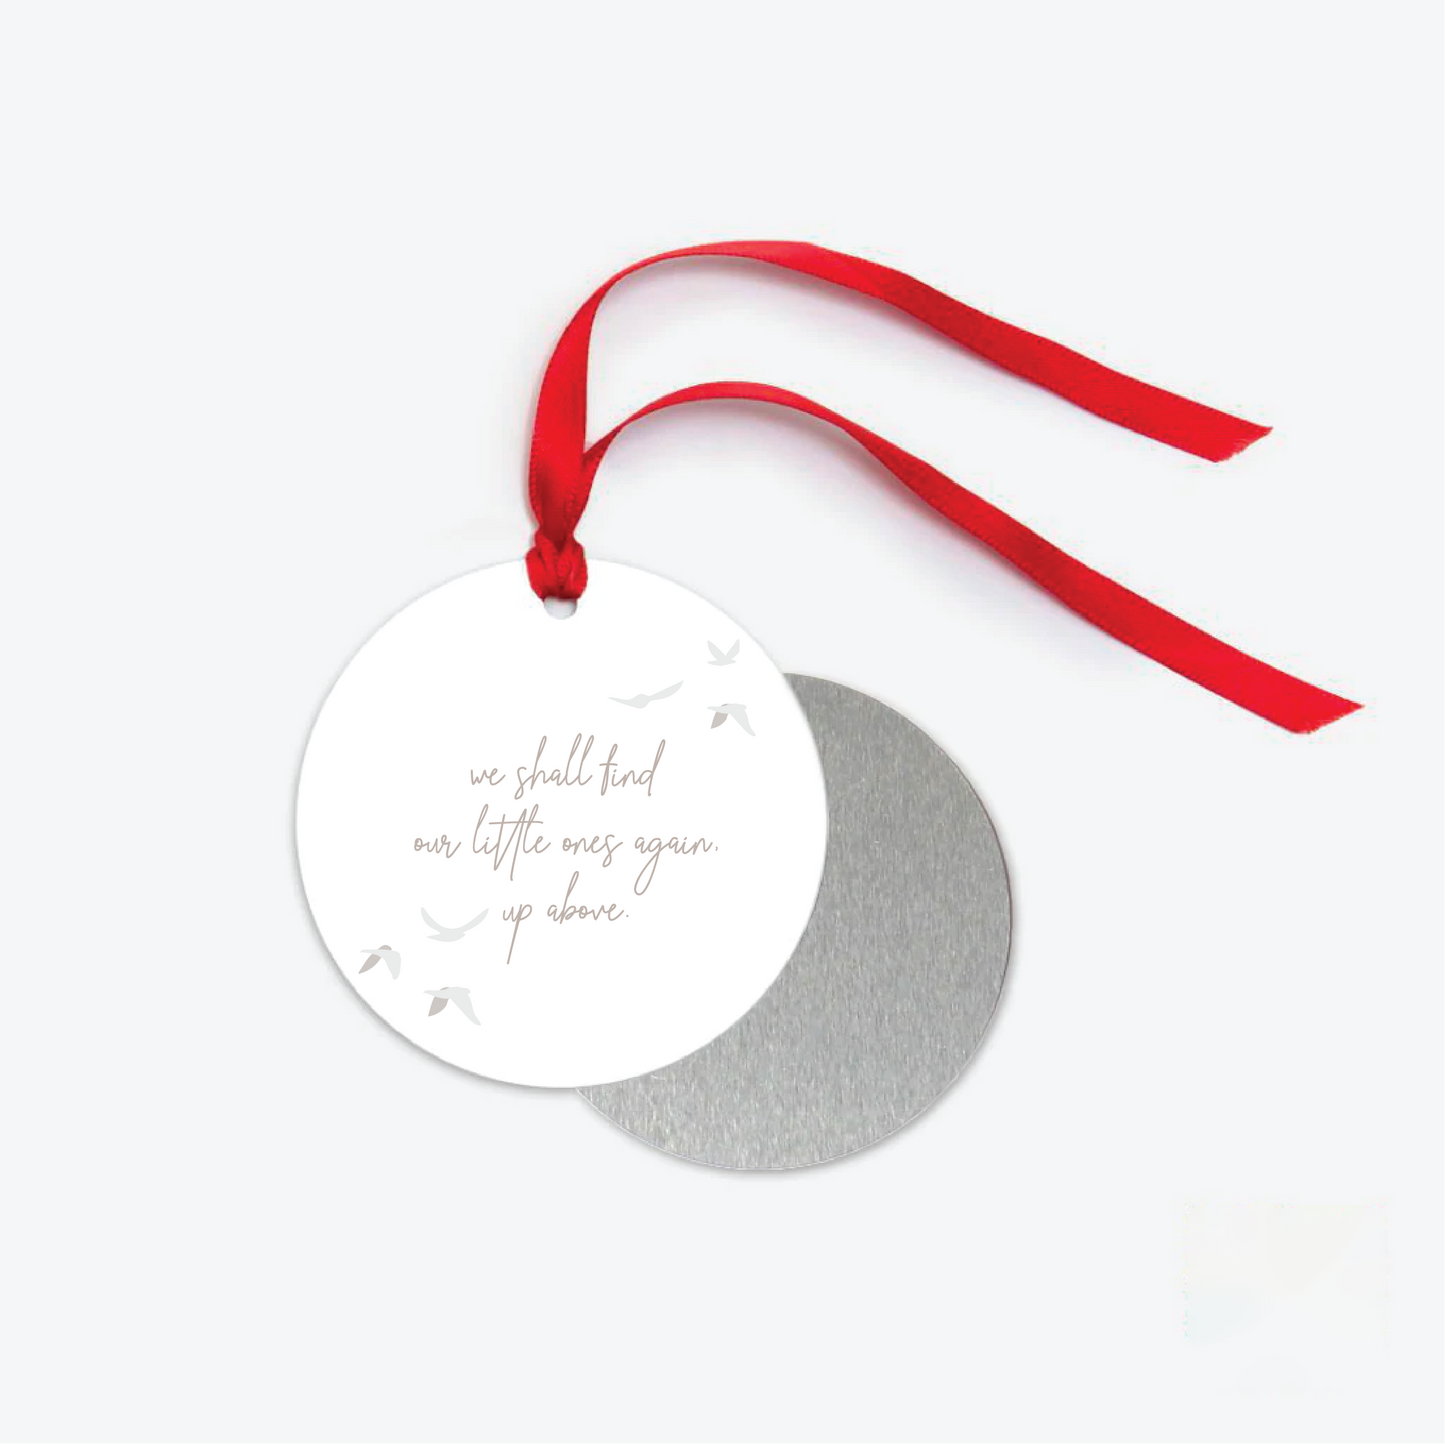 Infant and Child Loss Memorial Ornament